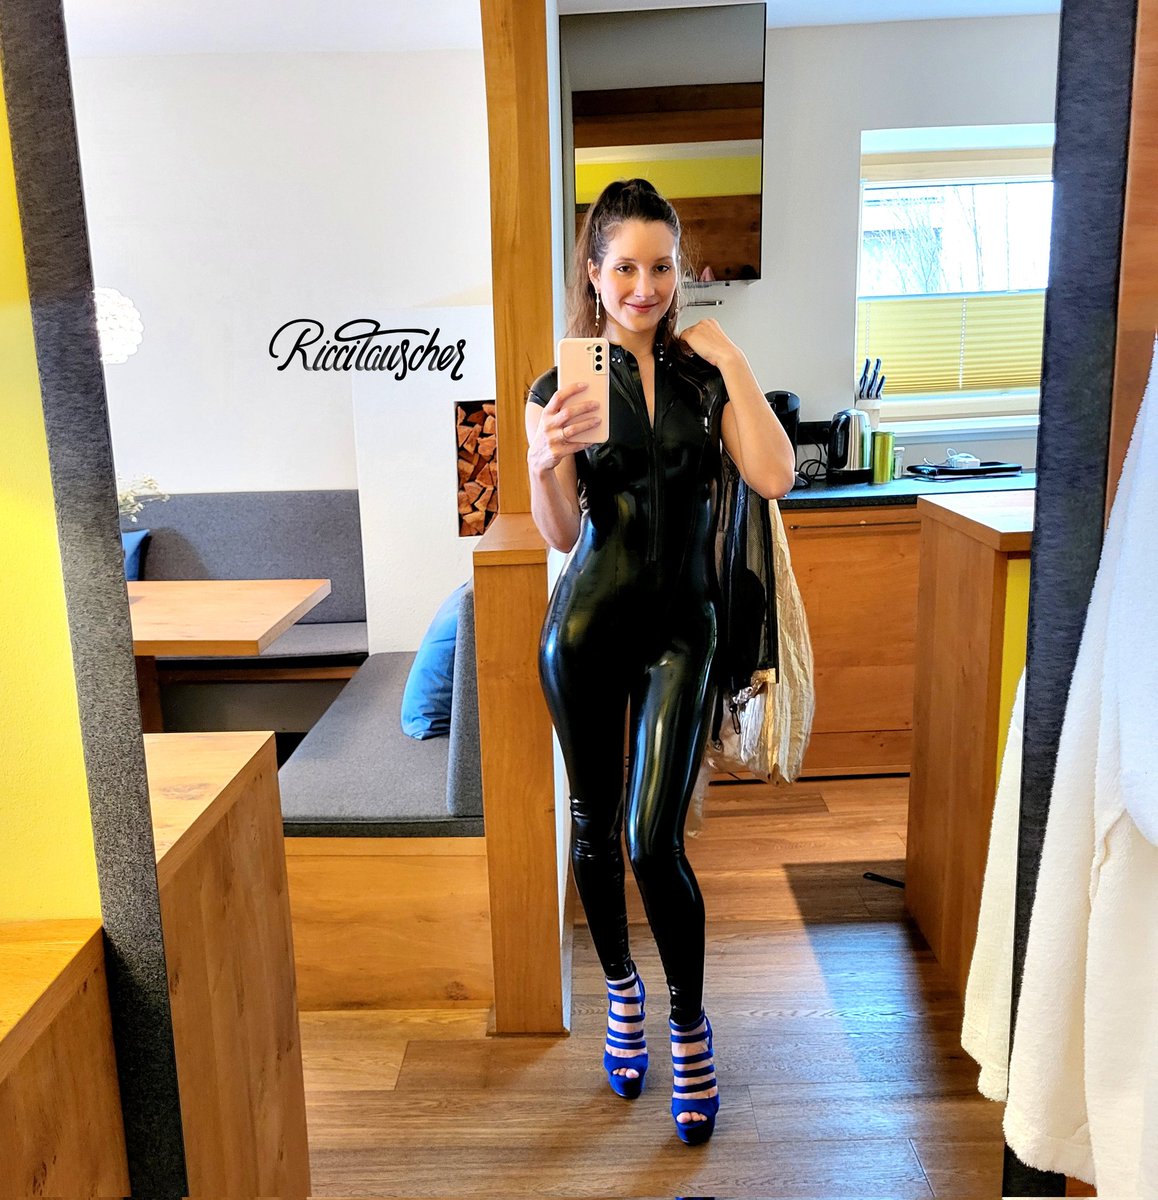 Ready to go out. Do you like to wear latex as well or do you prefer watching others to wear it? And yes, the option I don't like it at all doesn't exist here. 😉 #latexfashion #latexmode #latexmodel #Fashion #latexlovers #ricci #likeagirl #likeaboss #catsuit